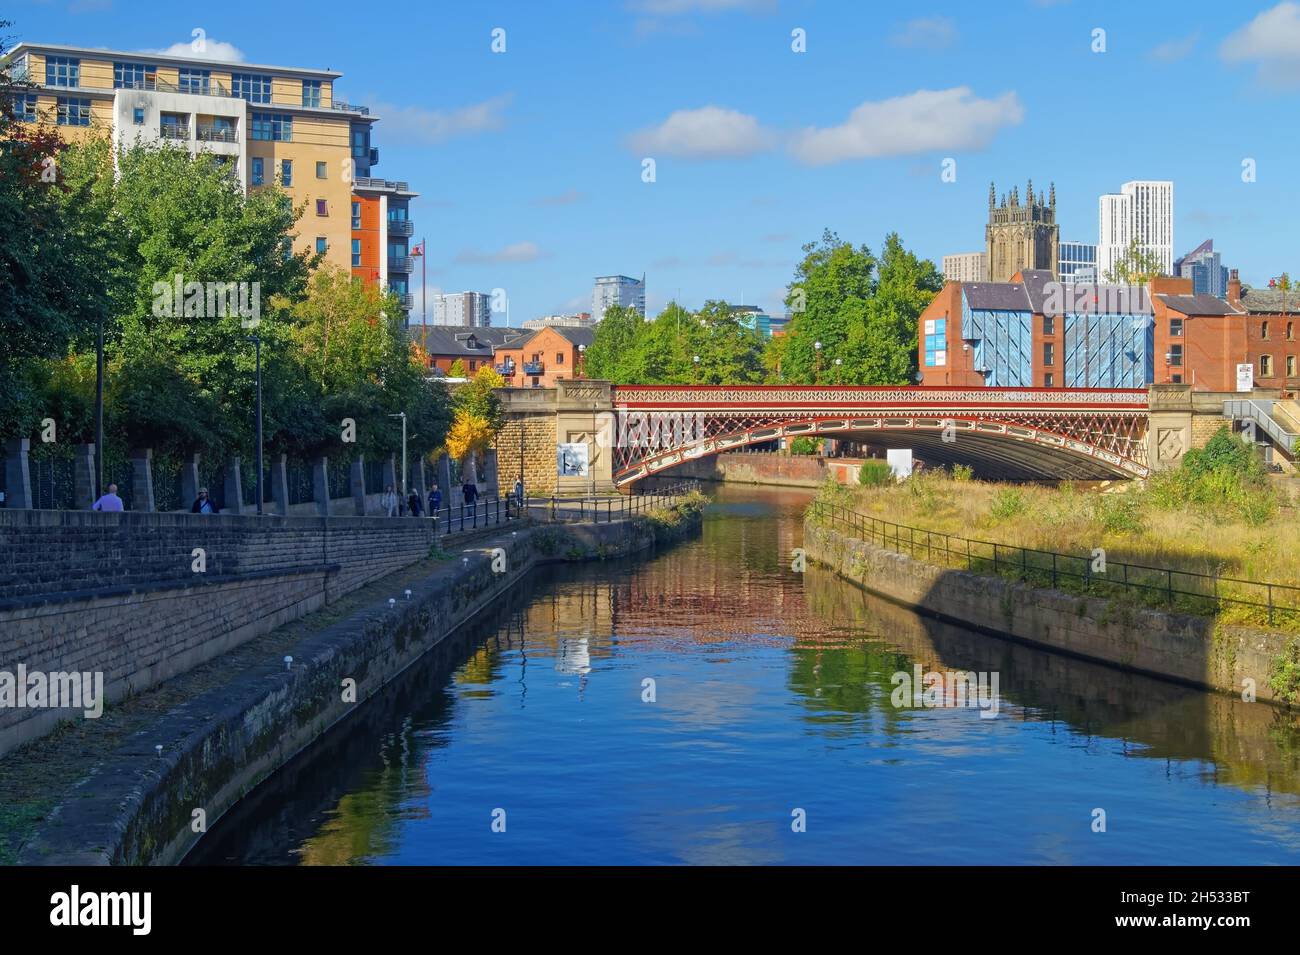 UK, West Yorkshire, Leeds, Crown Point Bridge over the River Aire, with Apartments, Leeds Minster and Altus Building dominating the skyline. Stock Photo